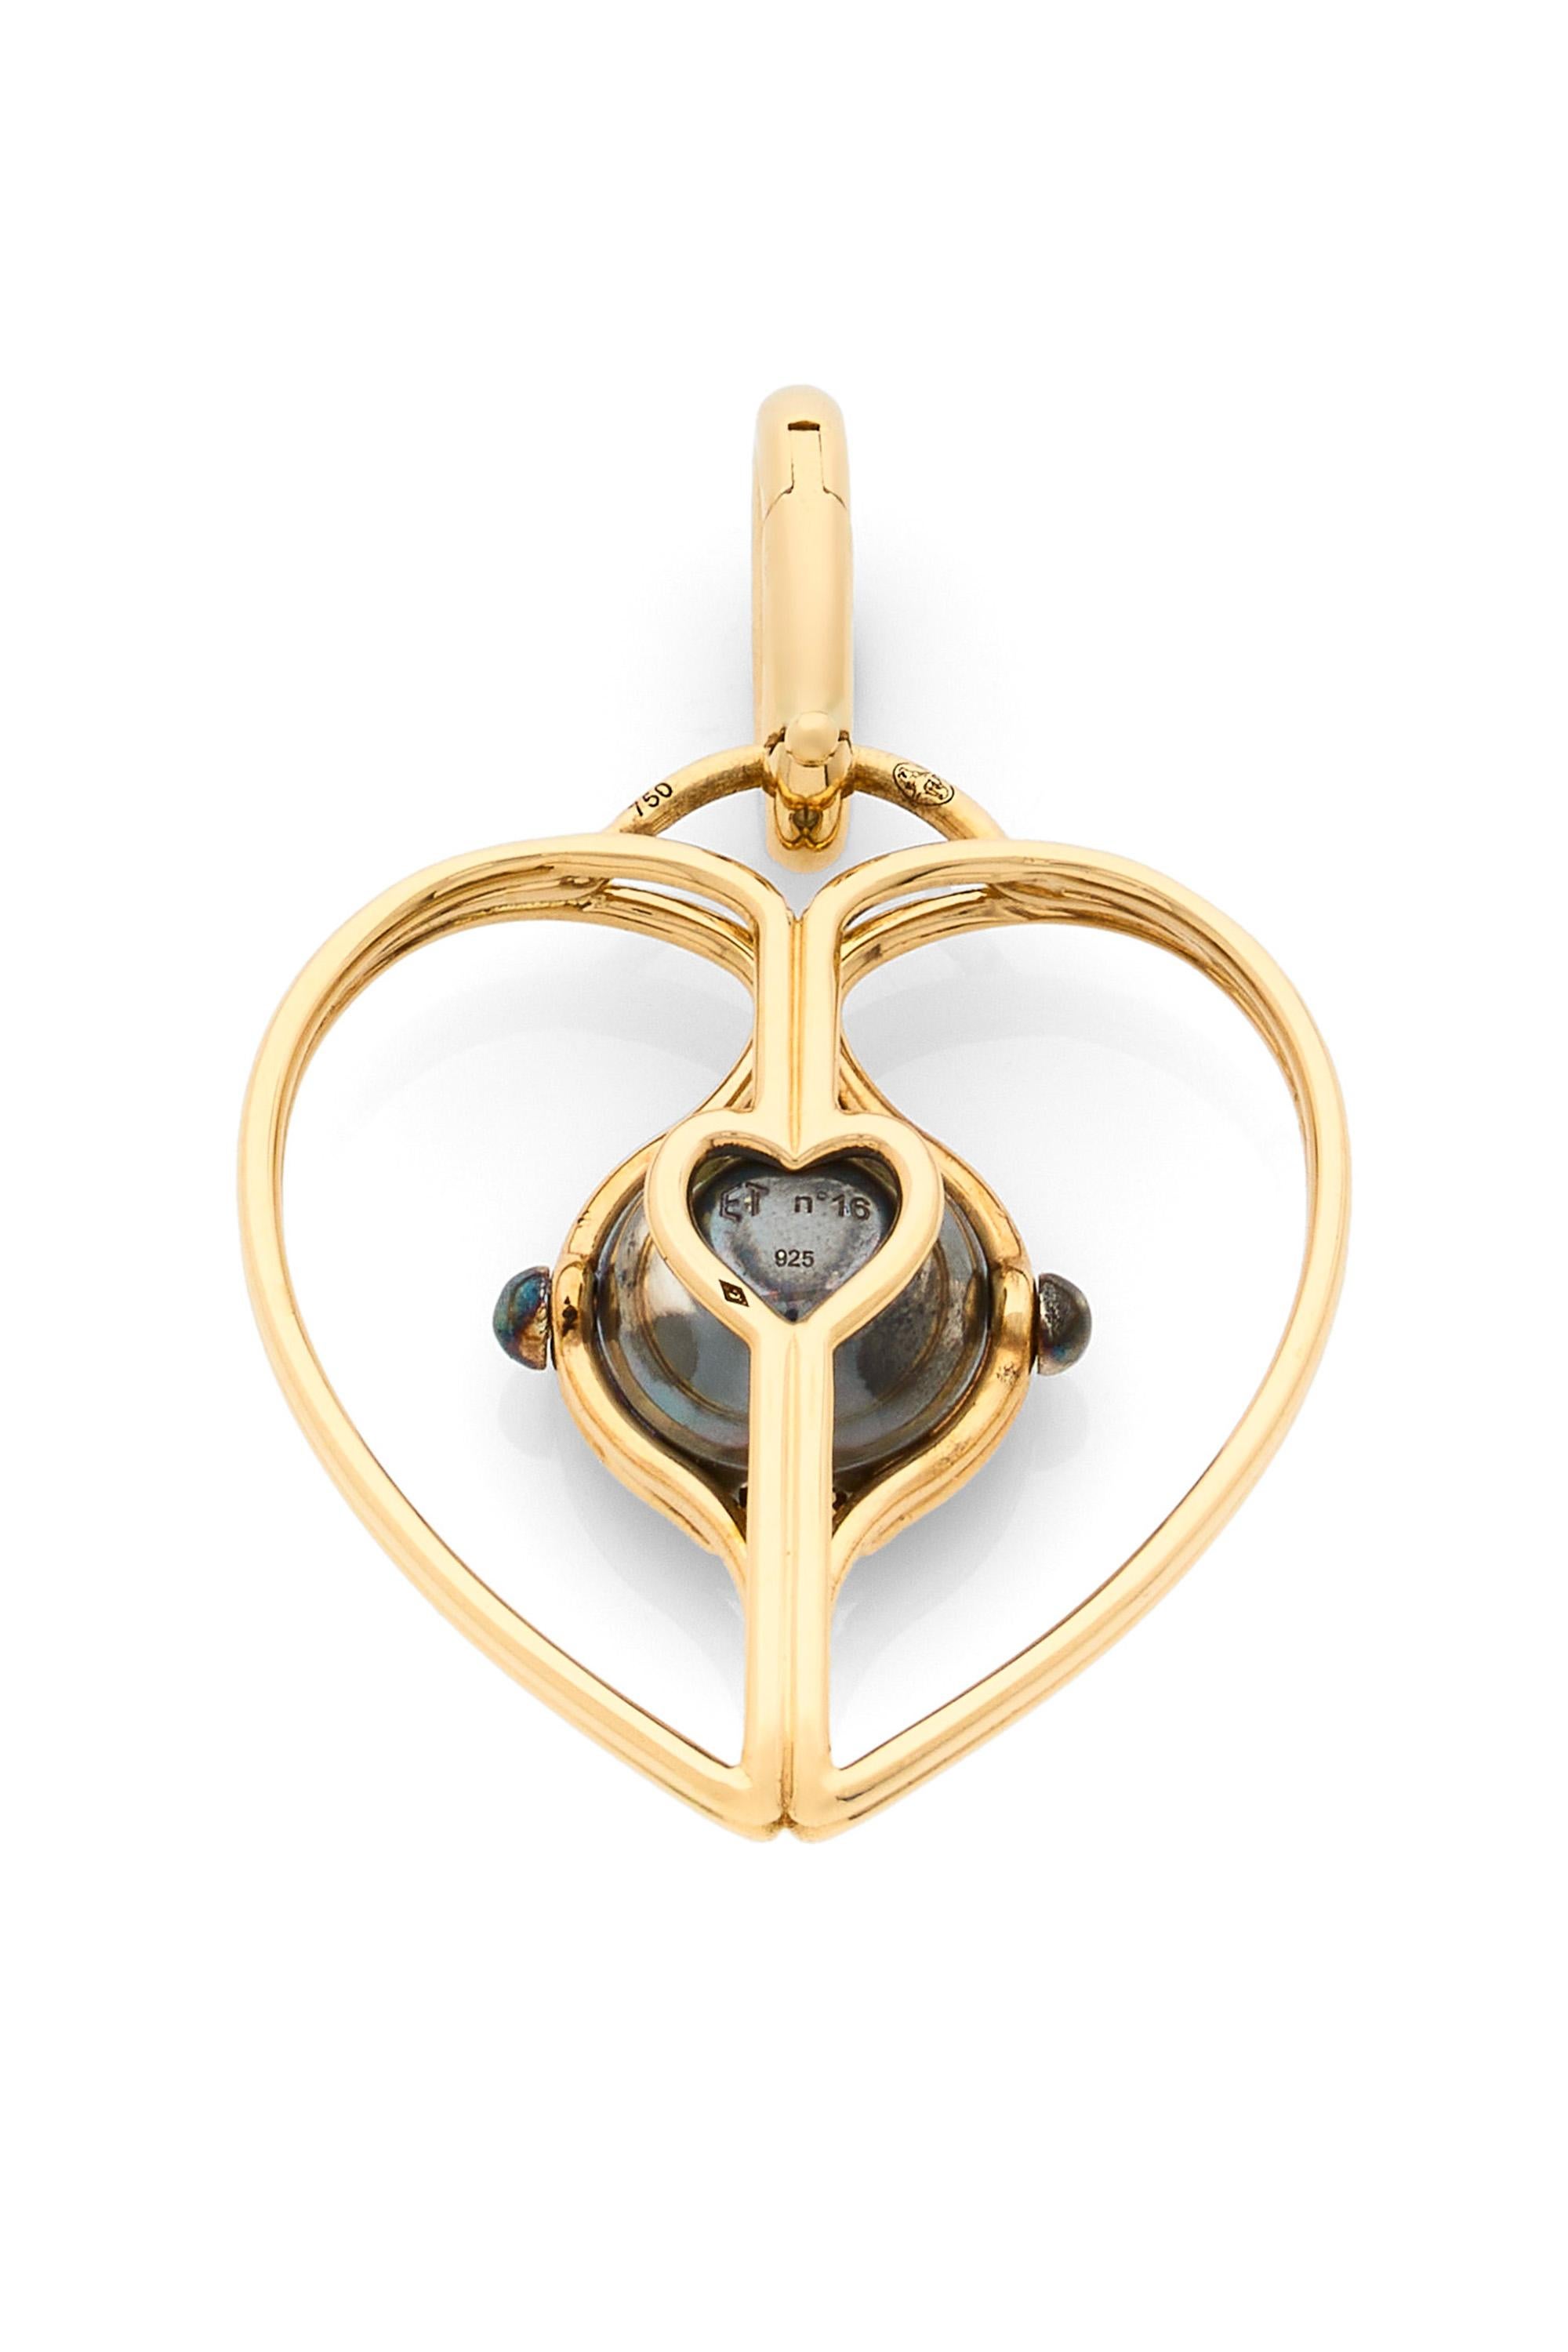 Neoclassical Mira Diamond Heart Charm in 18k Yellow Gold by Elie Top For Sale